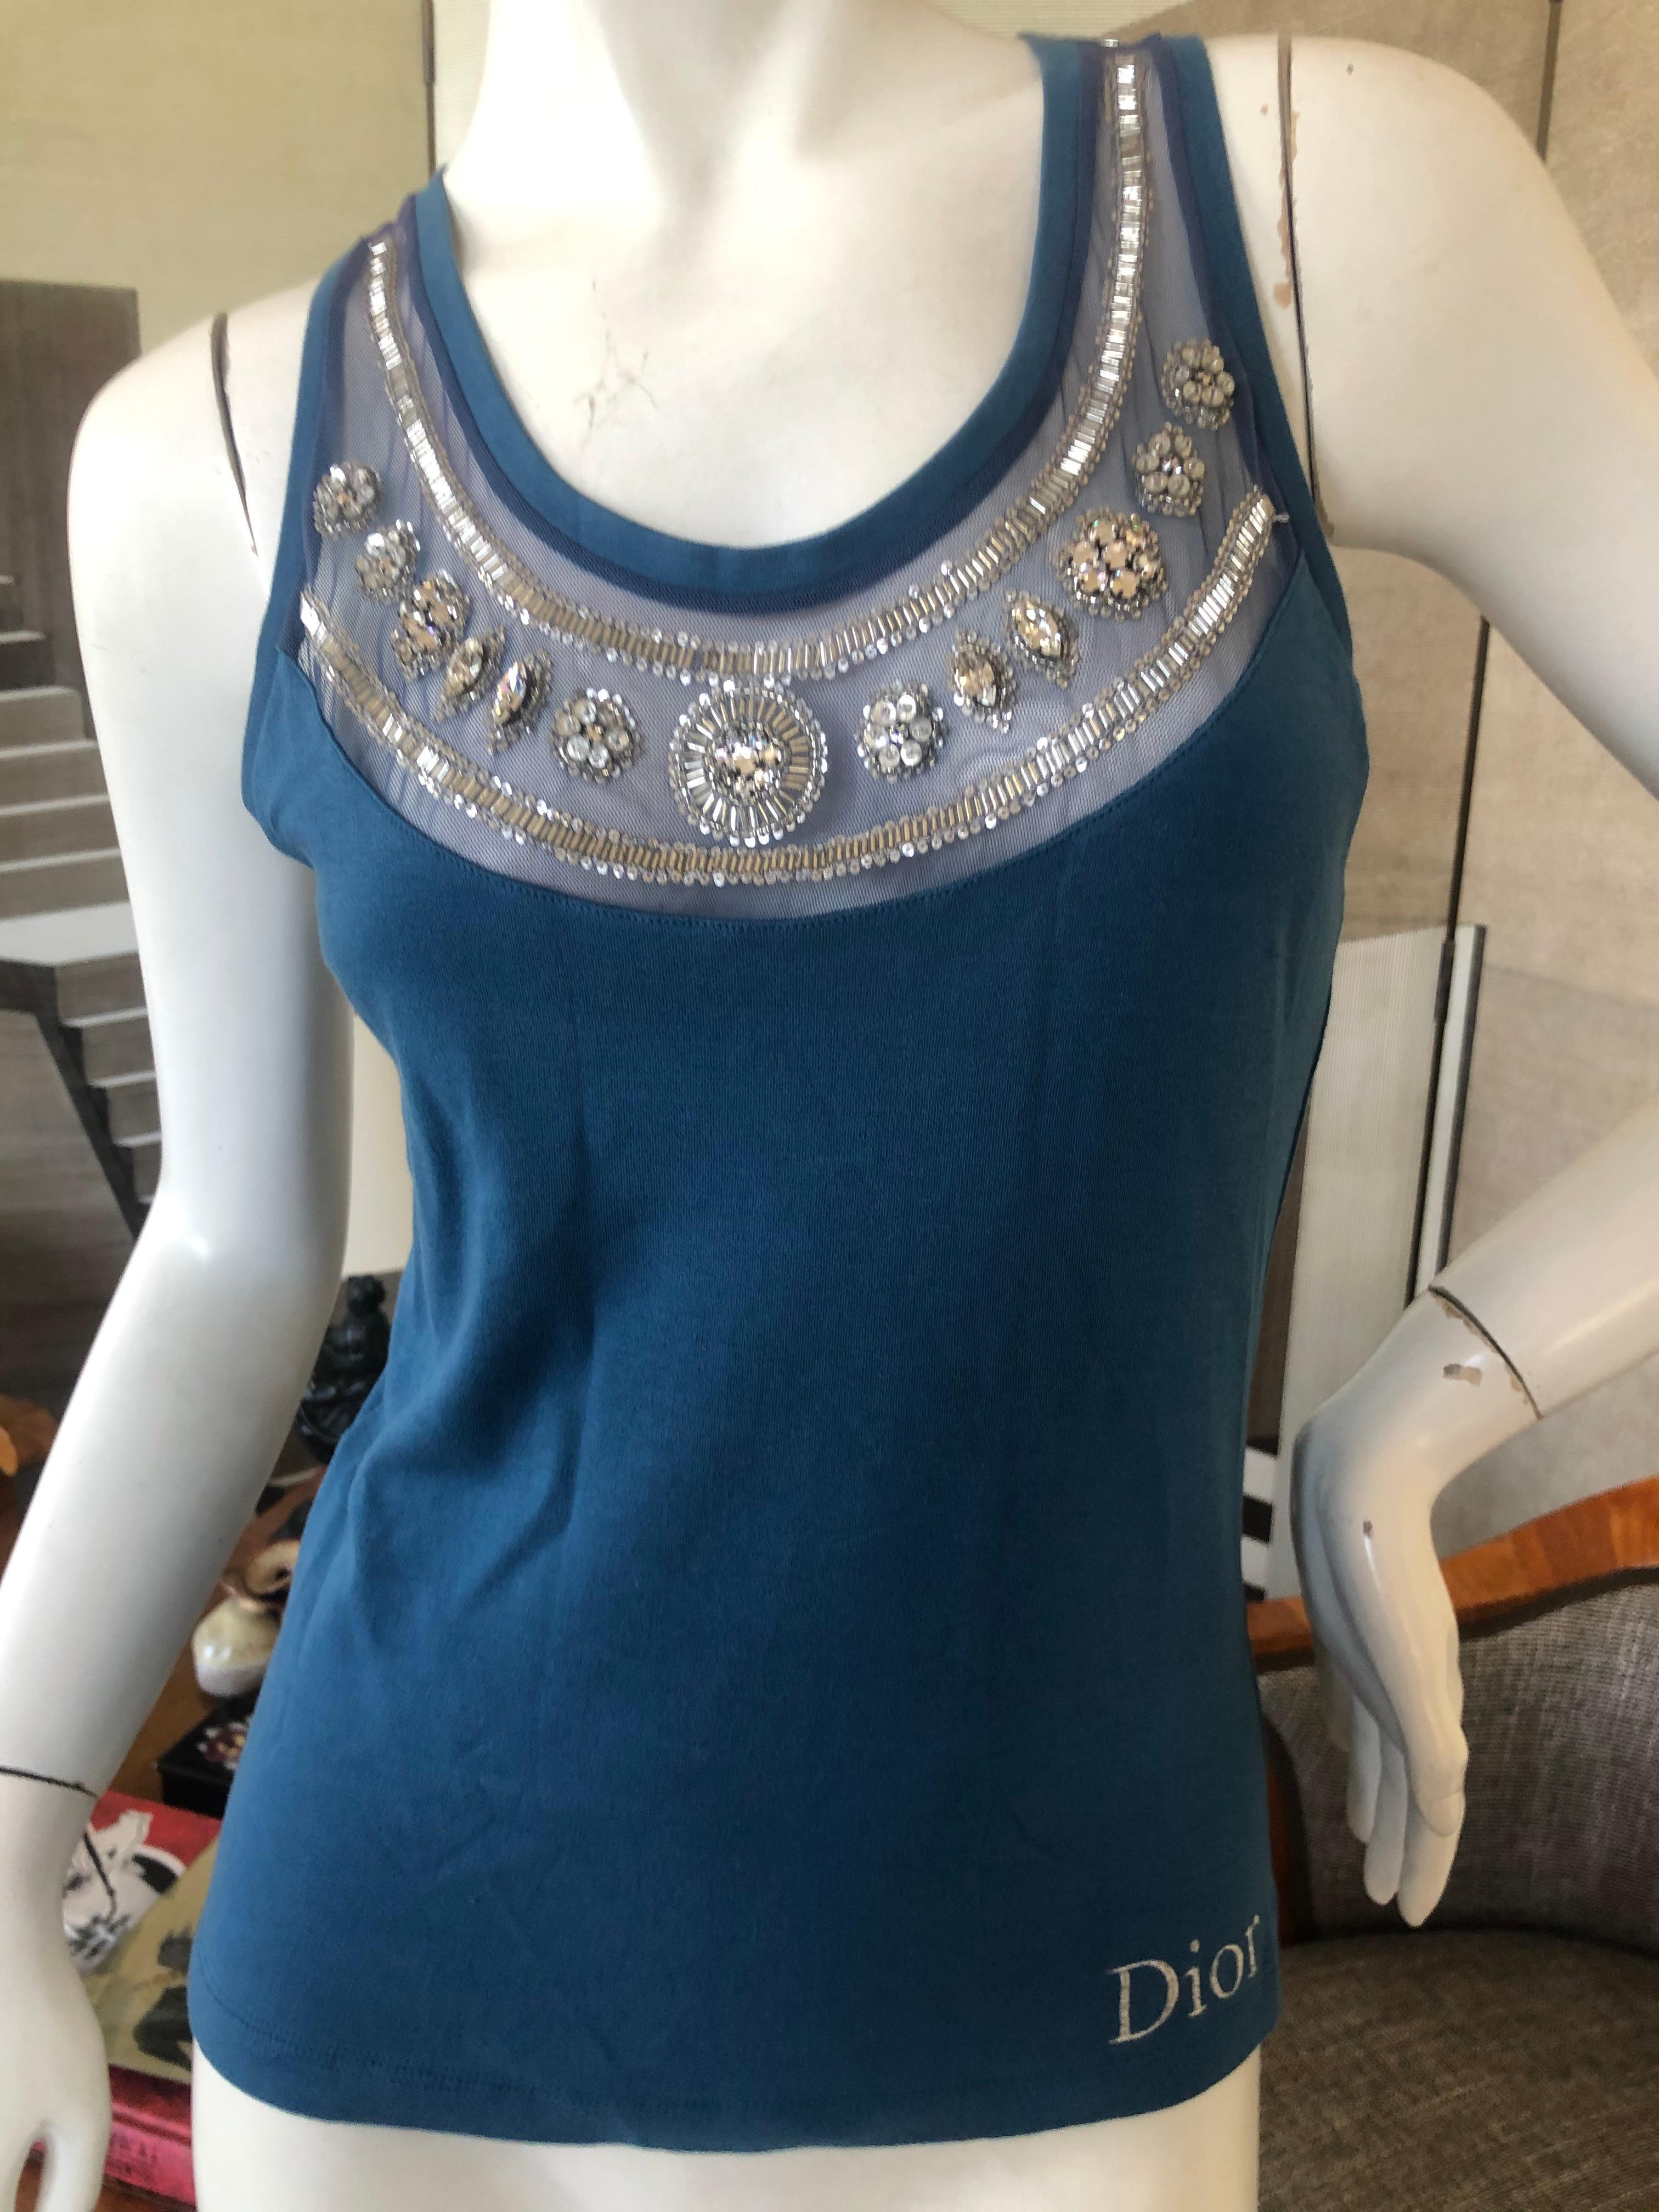 Christian Dior Crystal Embellished Evening Top by John Galliano In New Condition For Sale In Cloverdale, CA